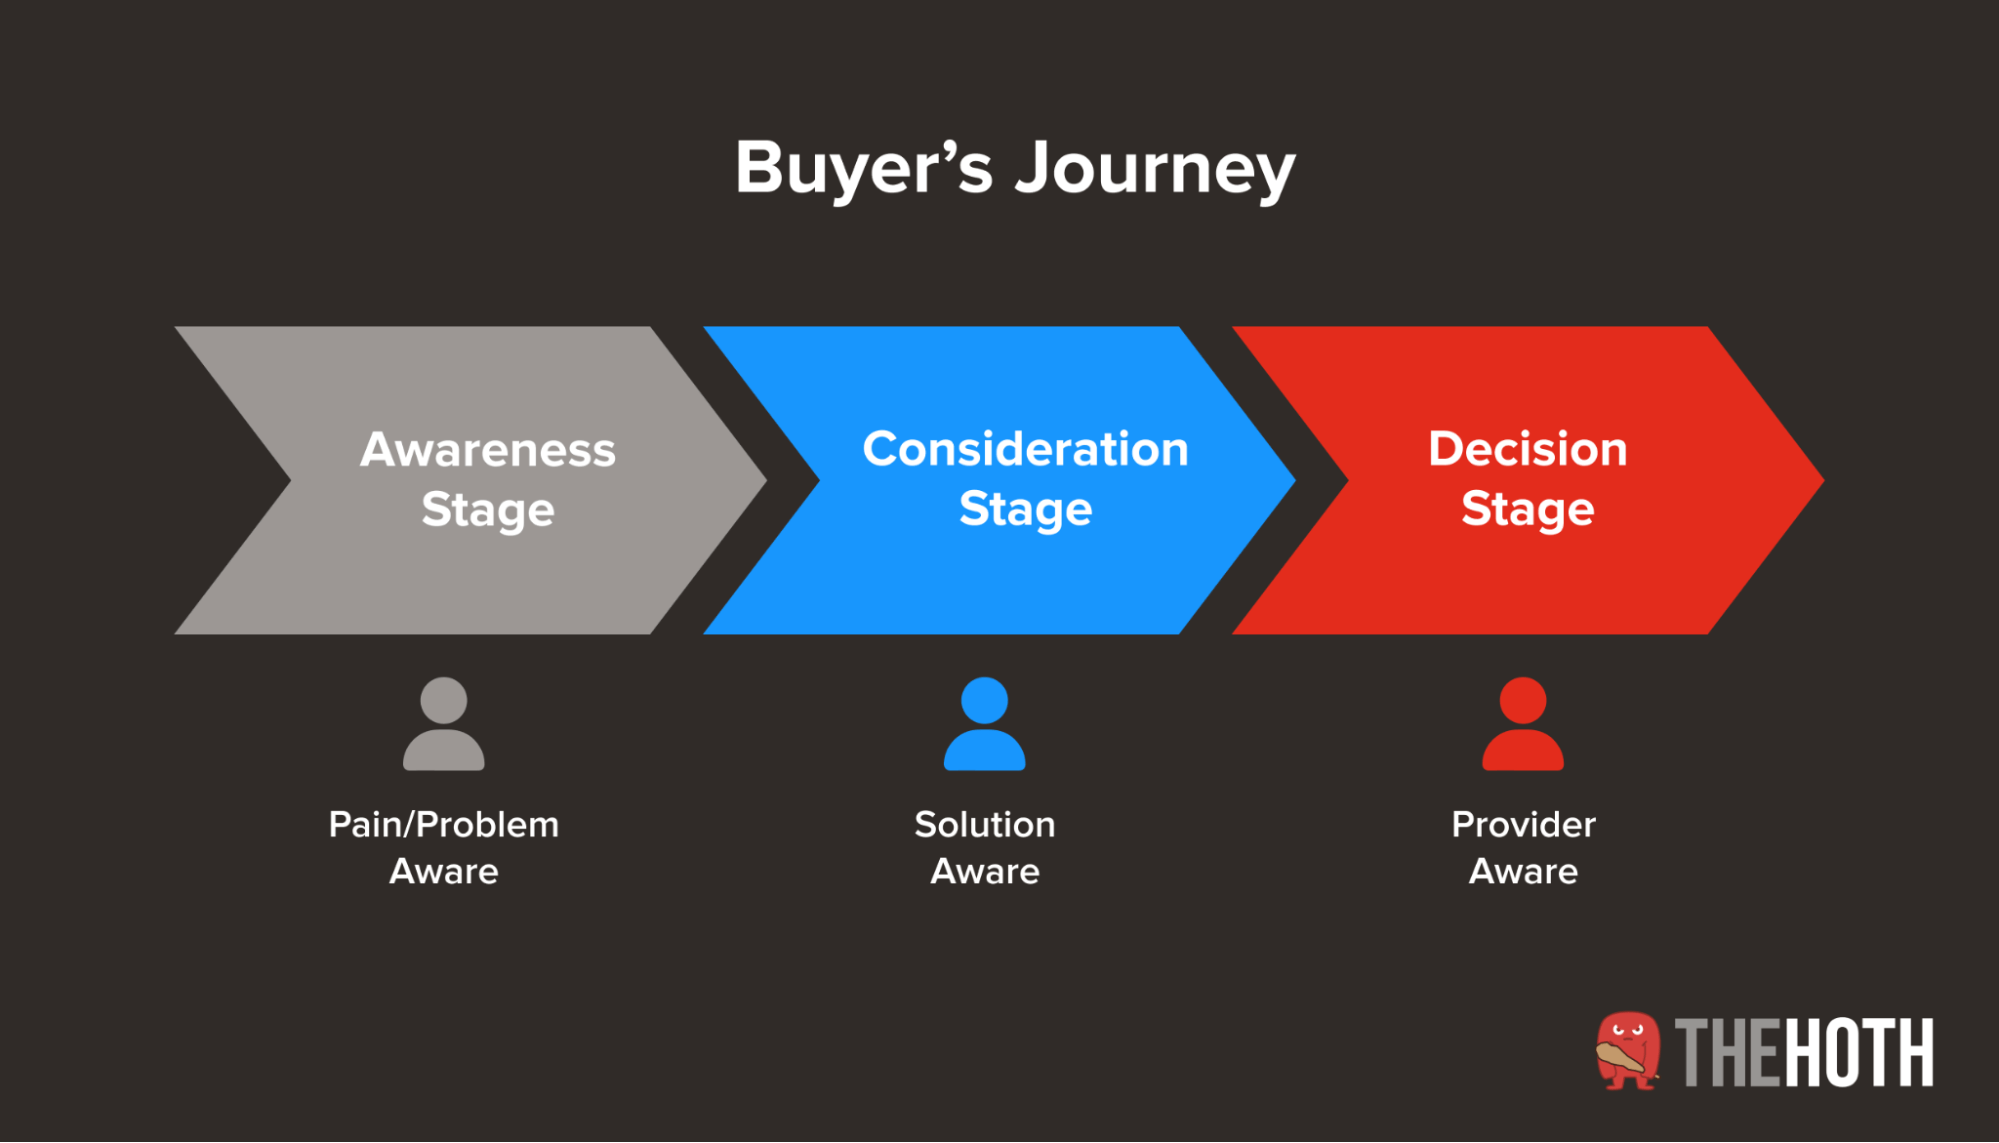 The different stages of a buyer’s lifecycle